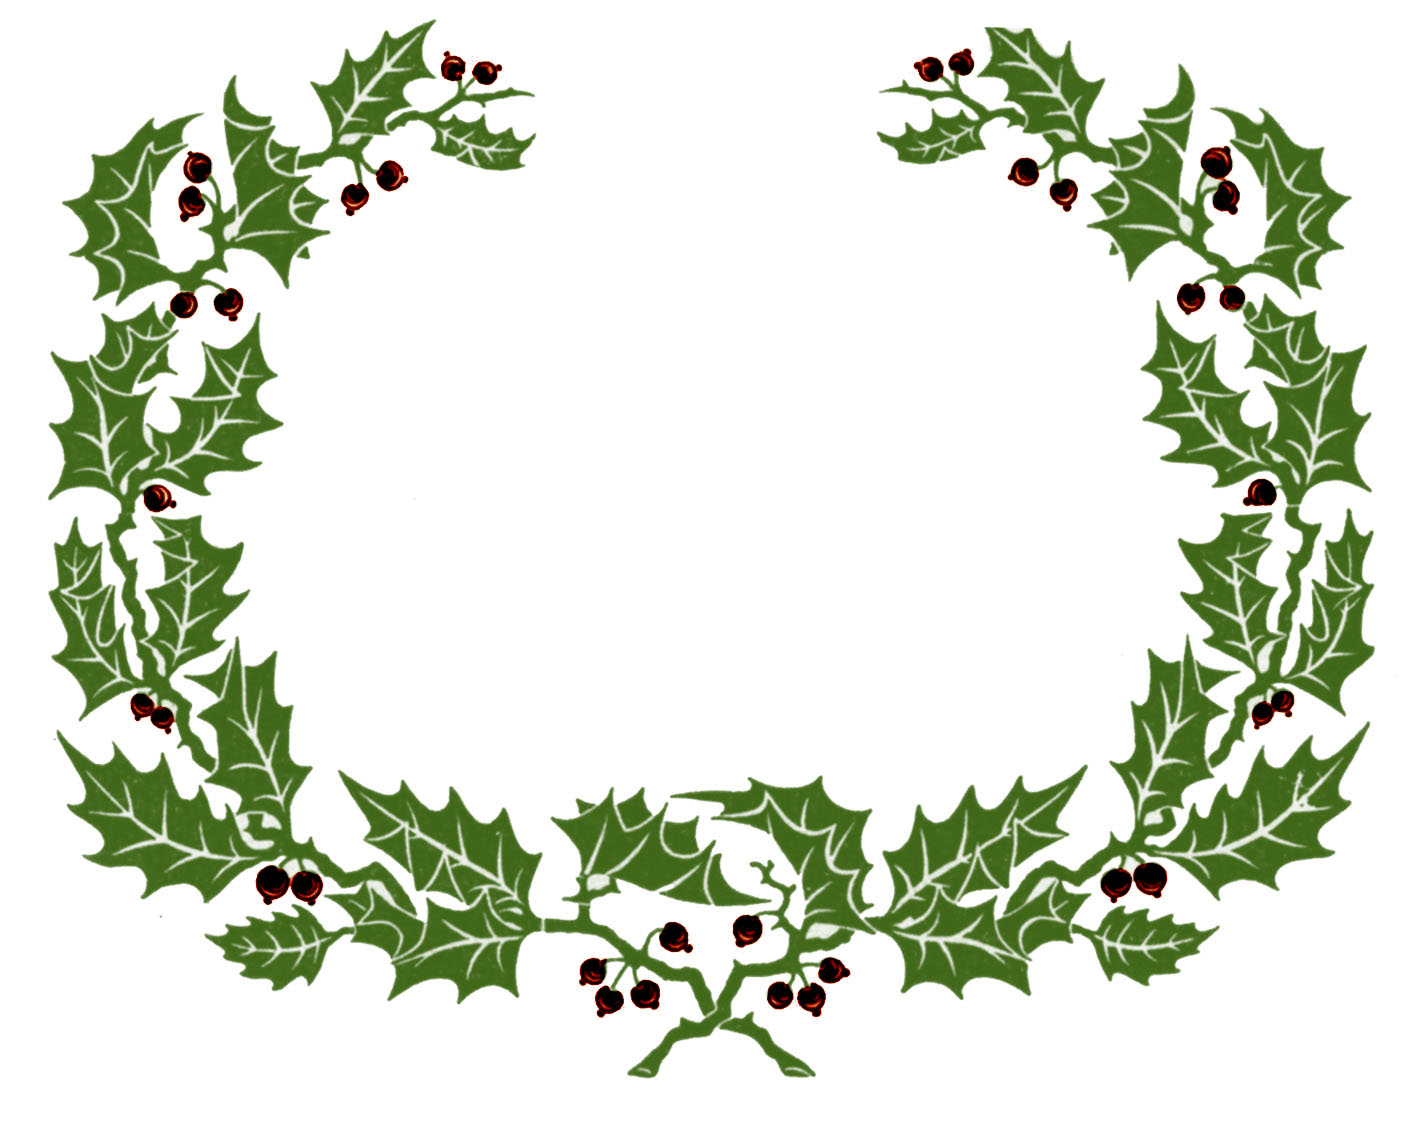 Vintage Clip Art - Holly Wreath Graphic Frame - The ...